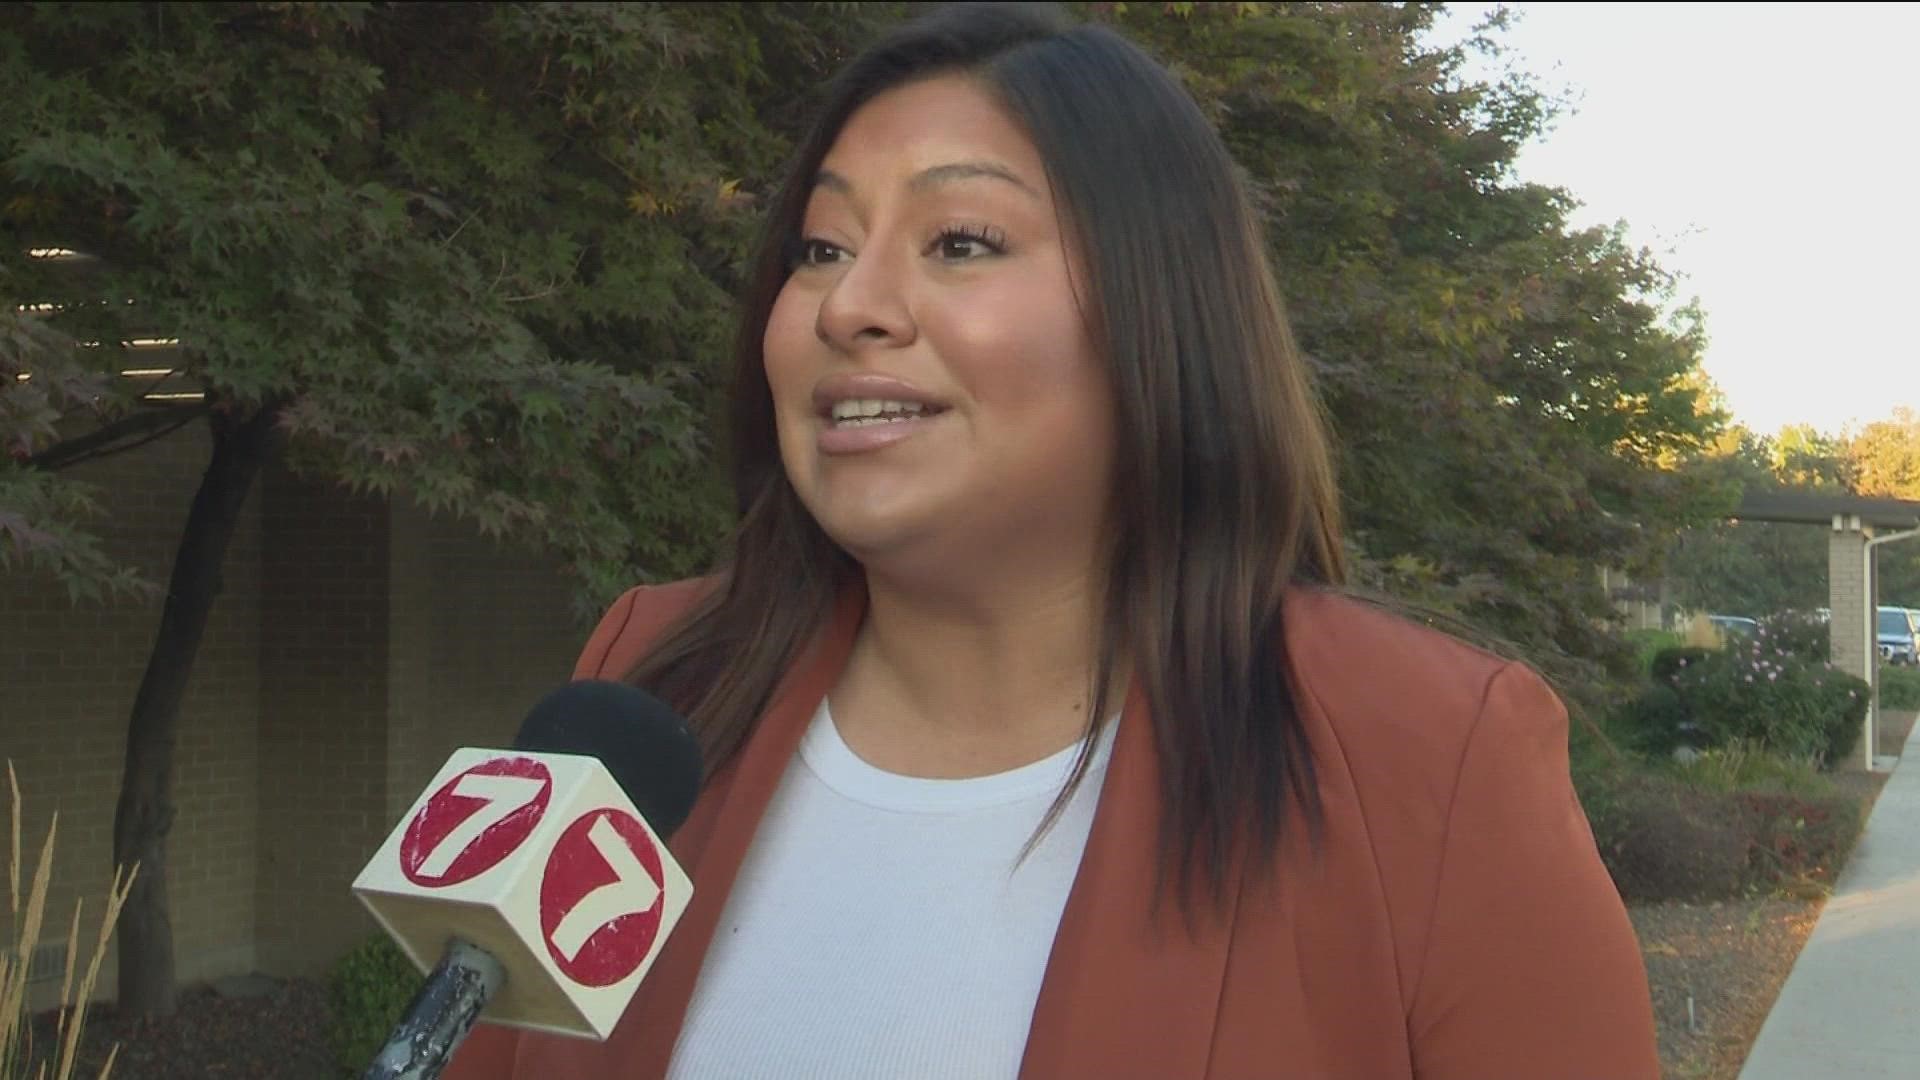 Driving With Out Fear is a campaign to help spread awareness of a potential bill that would allow undocumented immigrants to get driver’s licenses in Idaho.